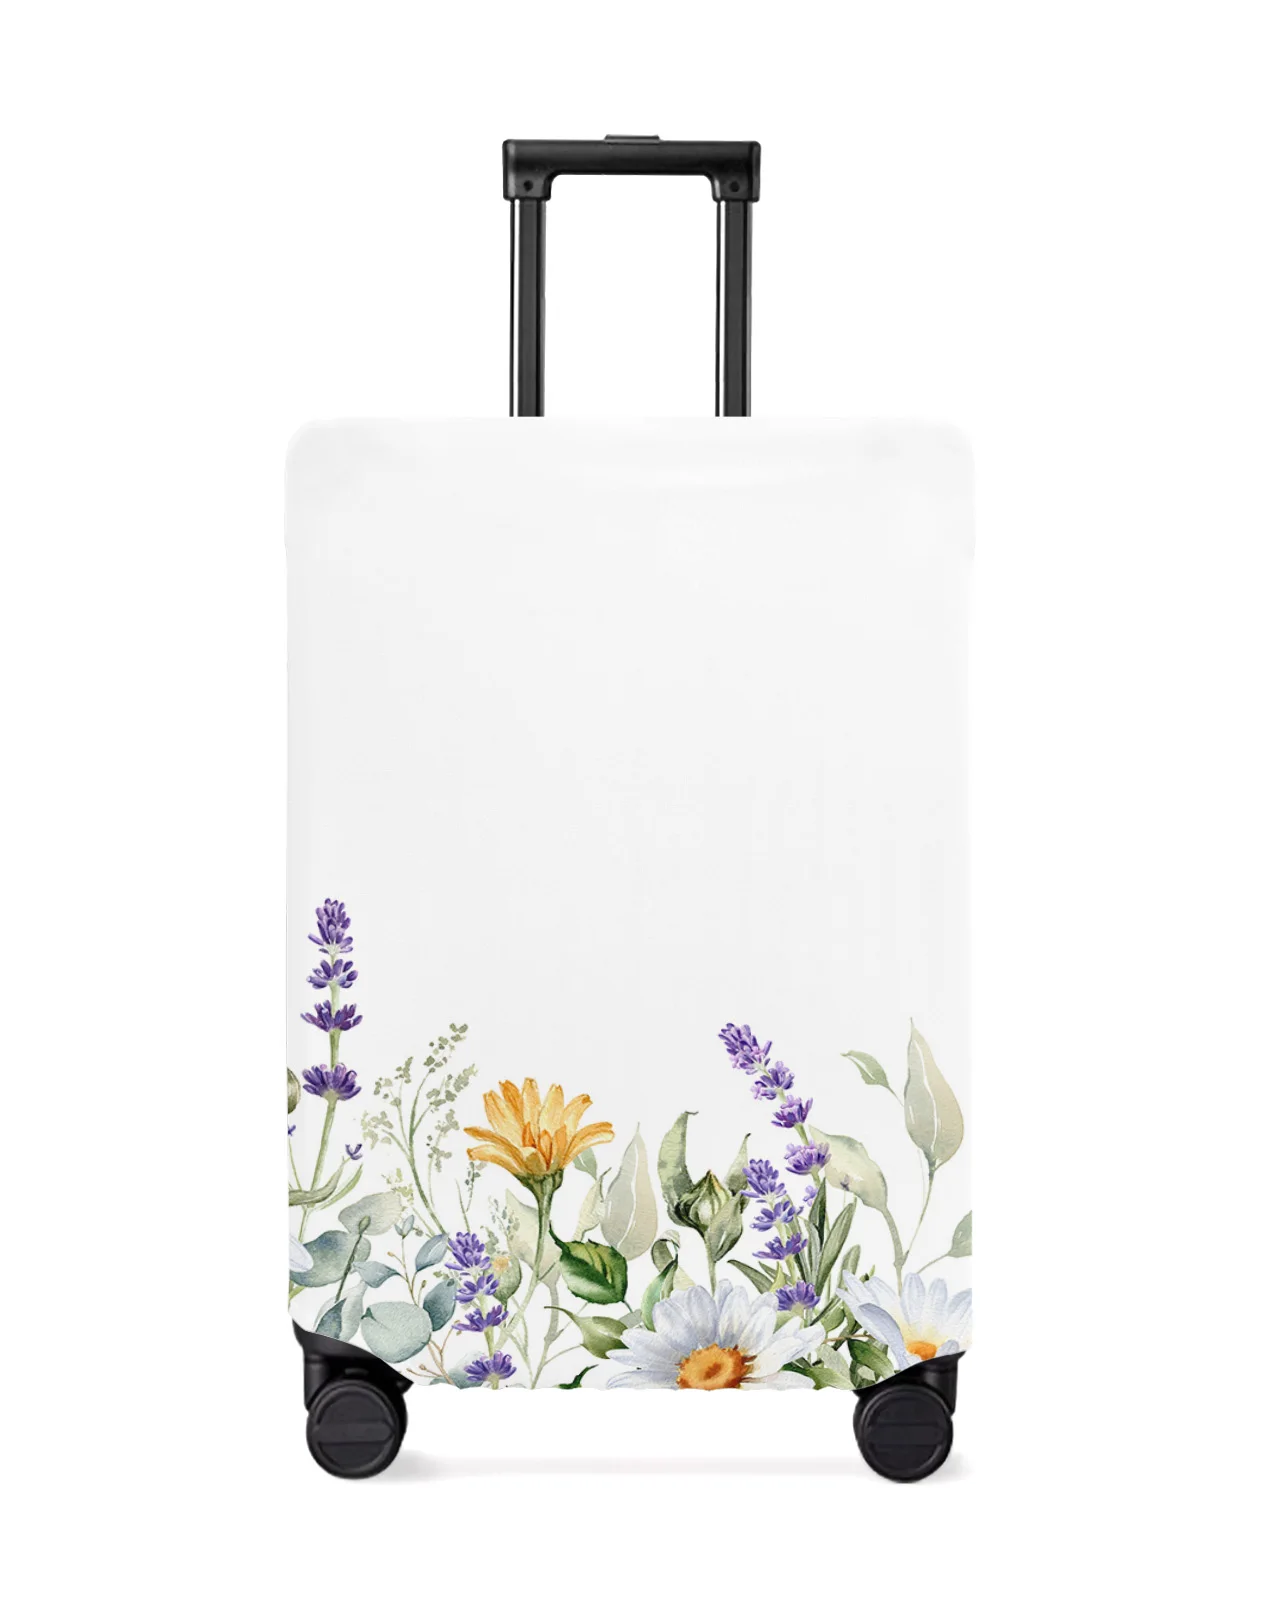 

Spring Daisy Lavender Eucalyptus Luggage Cover Stretch Suitcase Protector Baggage Dust Cover for 18-32 Inch Travel Suitcase Case